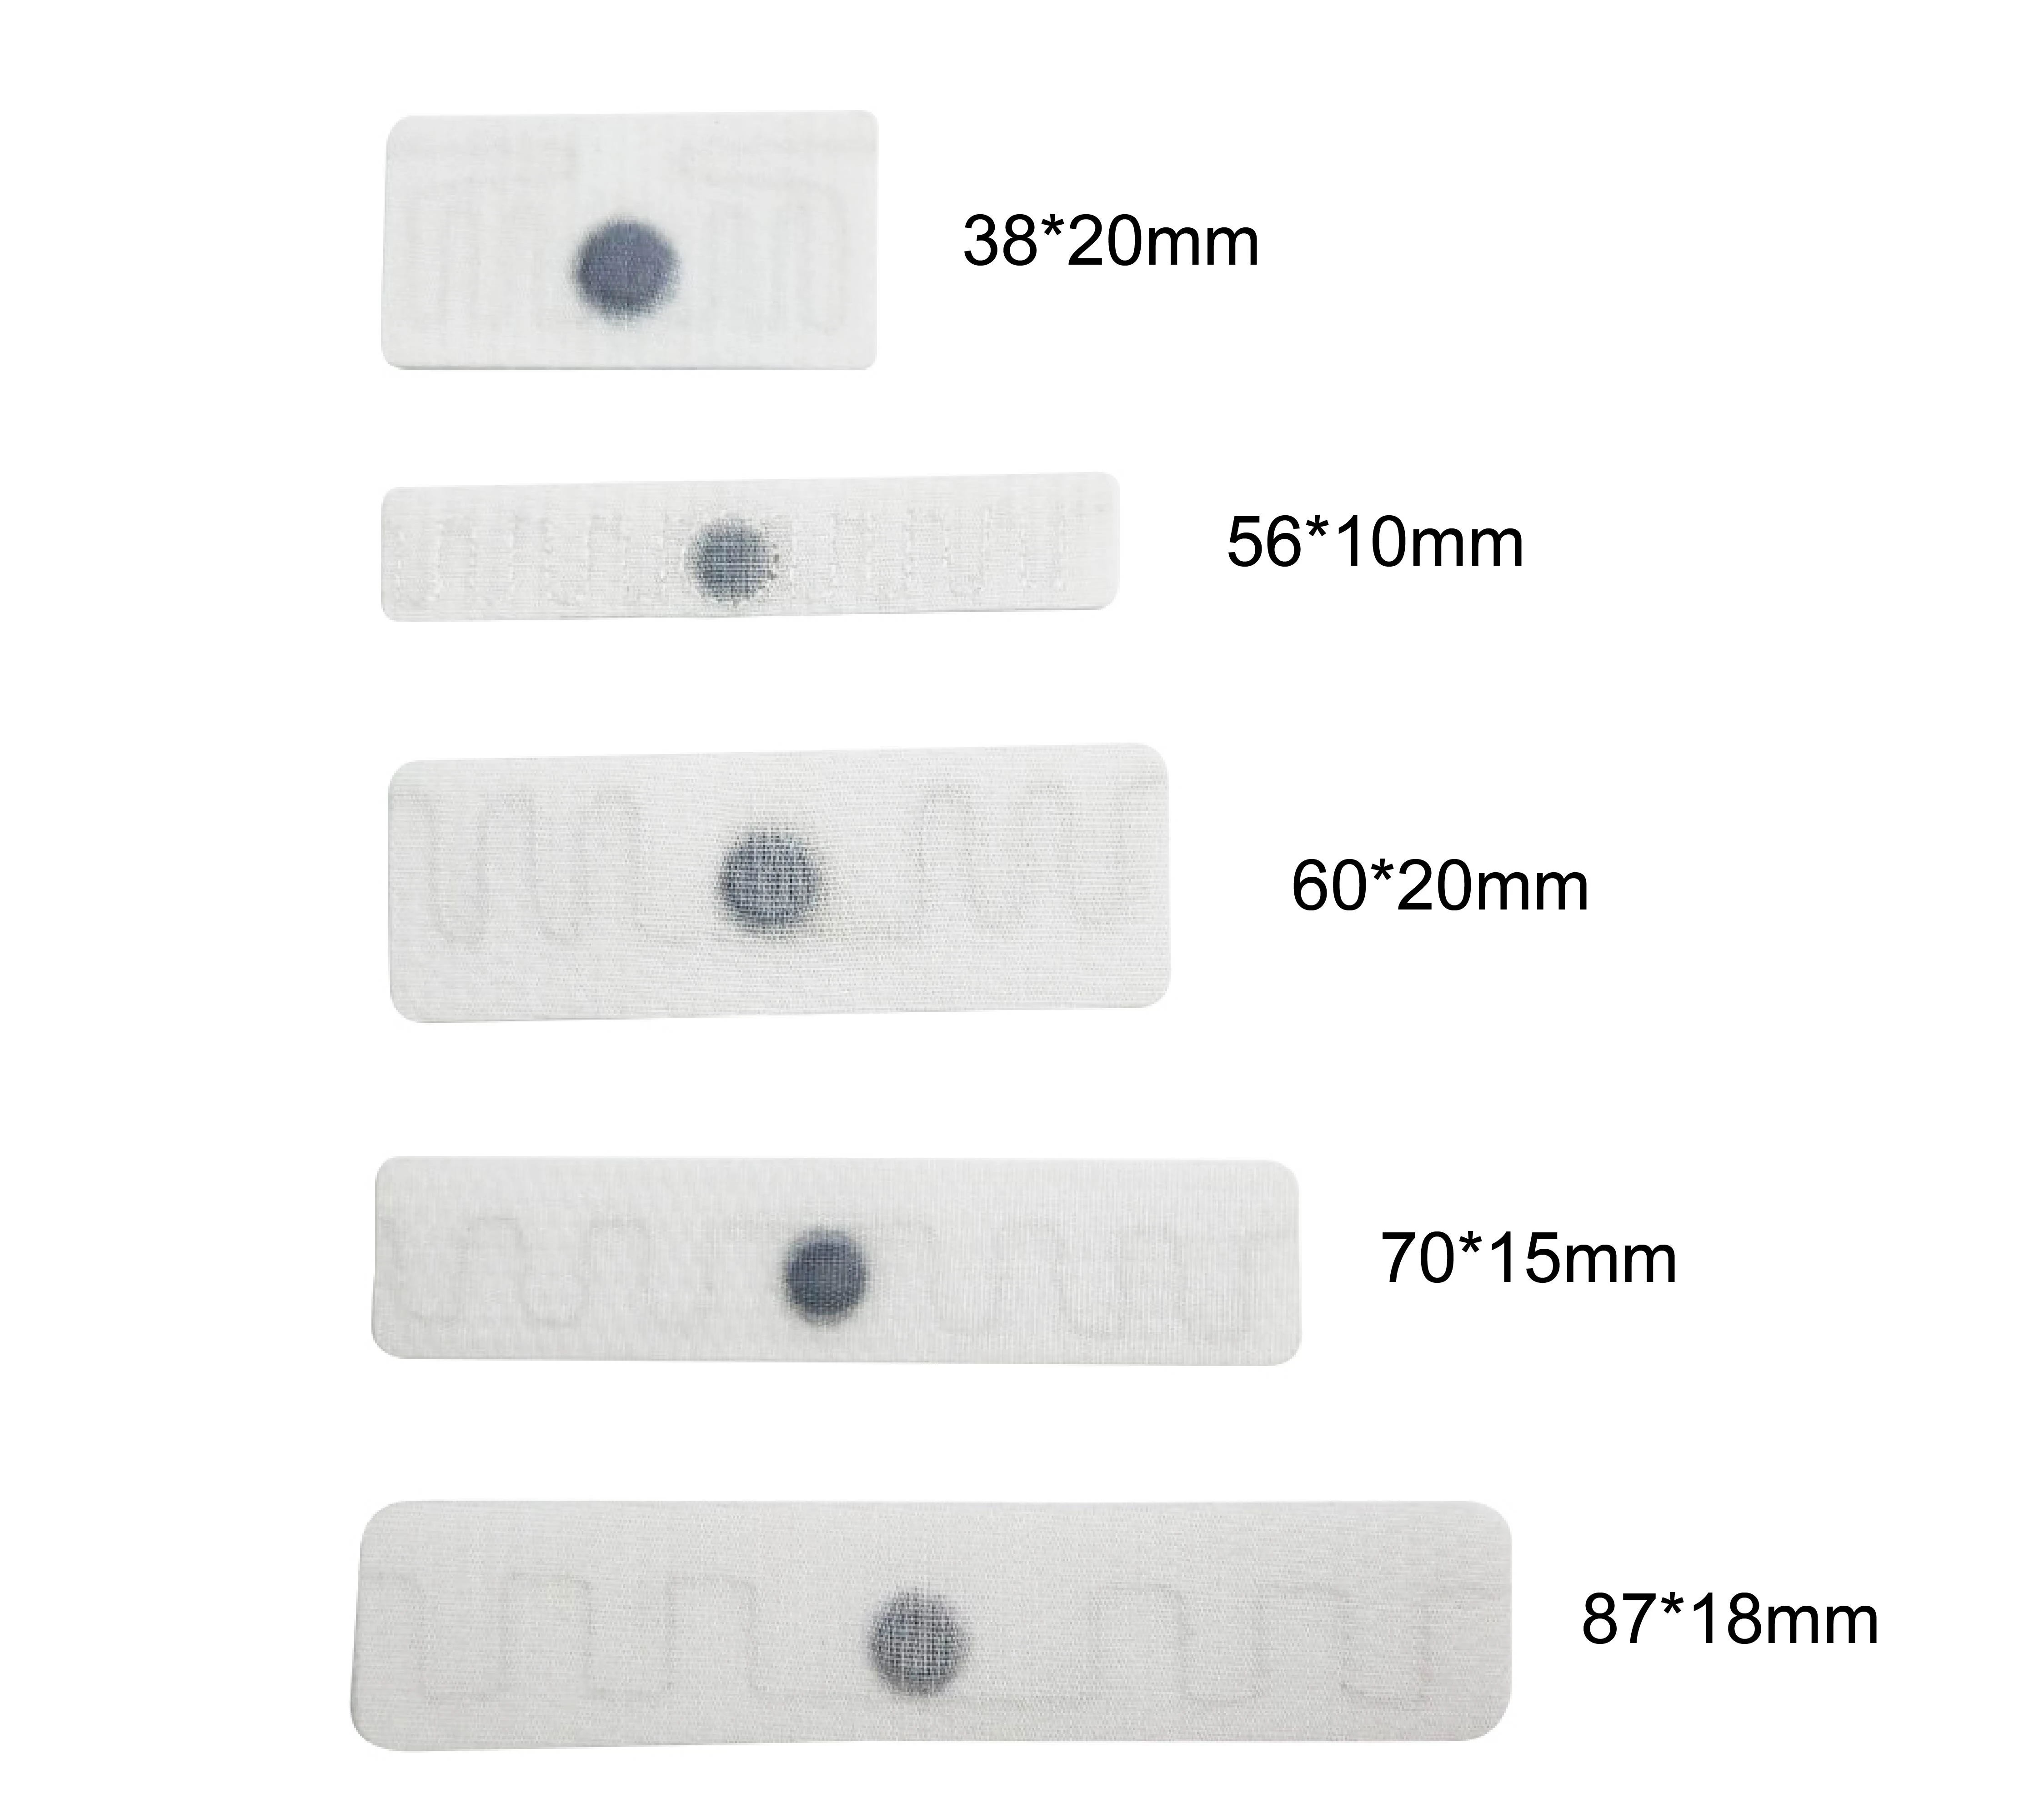 UHF waterproof heat resistant uhf textile clothing tag hotel sheets pillow case towel rfid tags